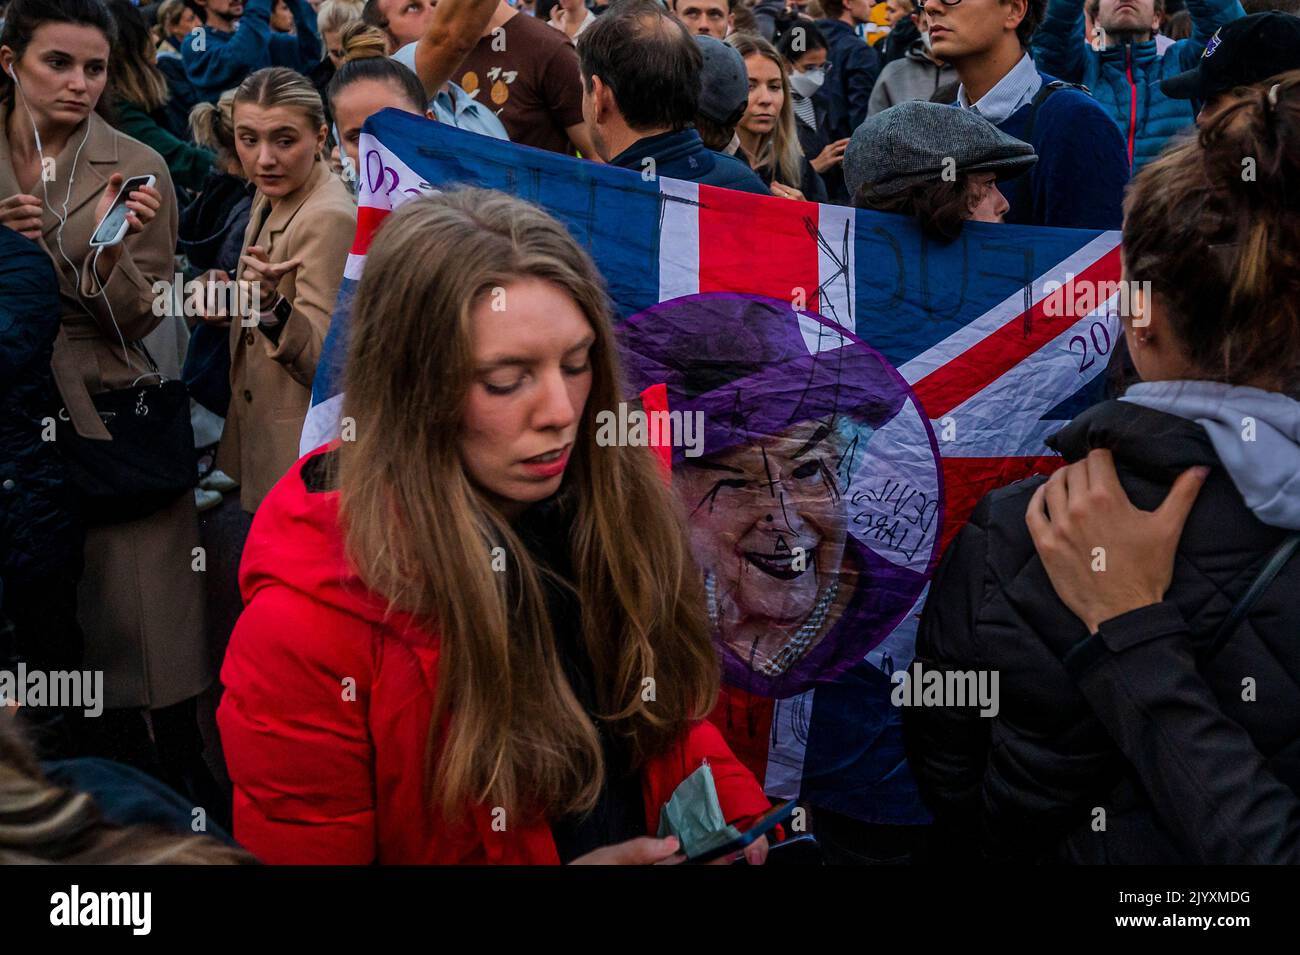 London, UK. 8th Sep, 2022. One protester joins the crowd that quickly gathers at Buckingham Palace but his message goes unnoticed - Queen Elizabeth the second is dead in her Platinum Jubillee year. The announcement came early this evening from Balmoral Castle. Credit: Guy Bell/Alamy Live News Stock Photo